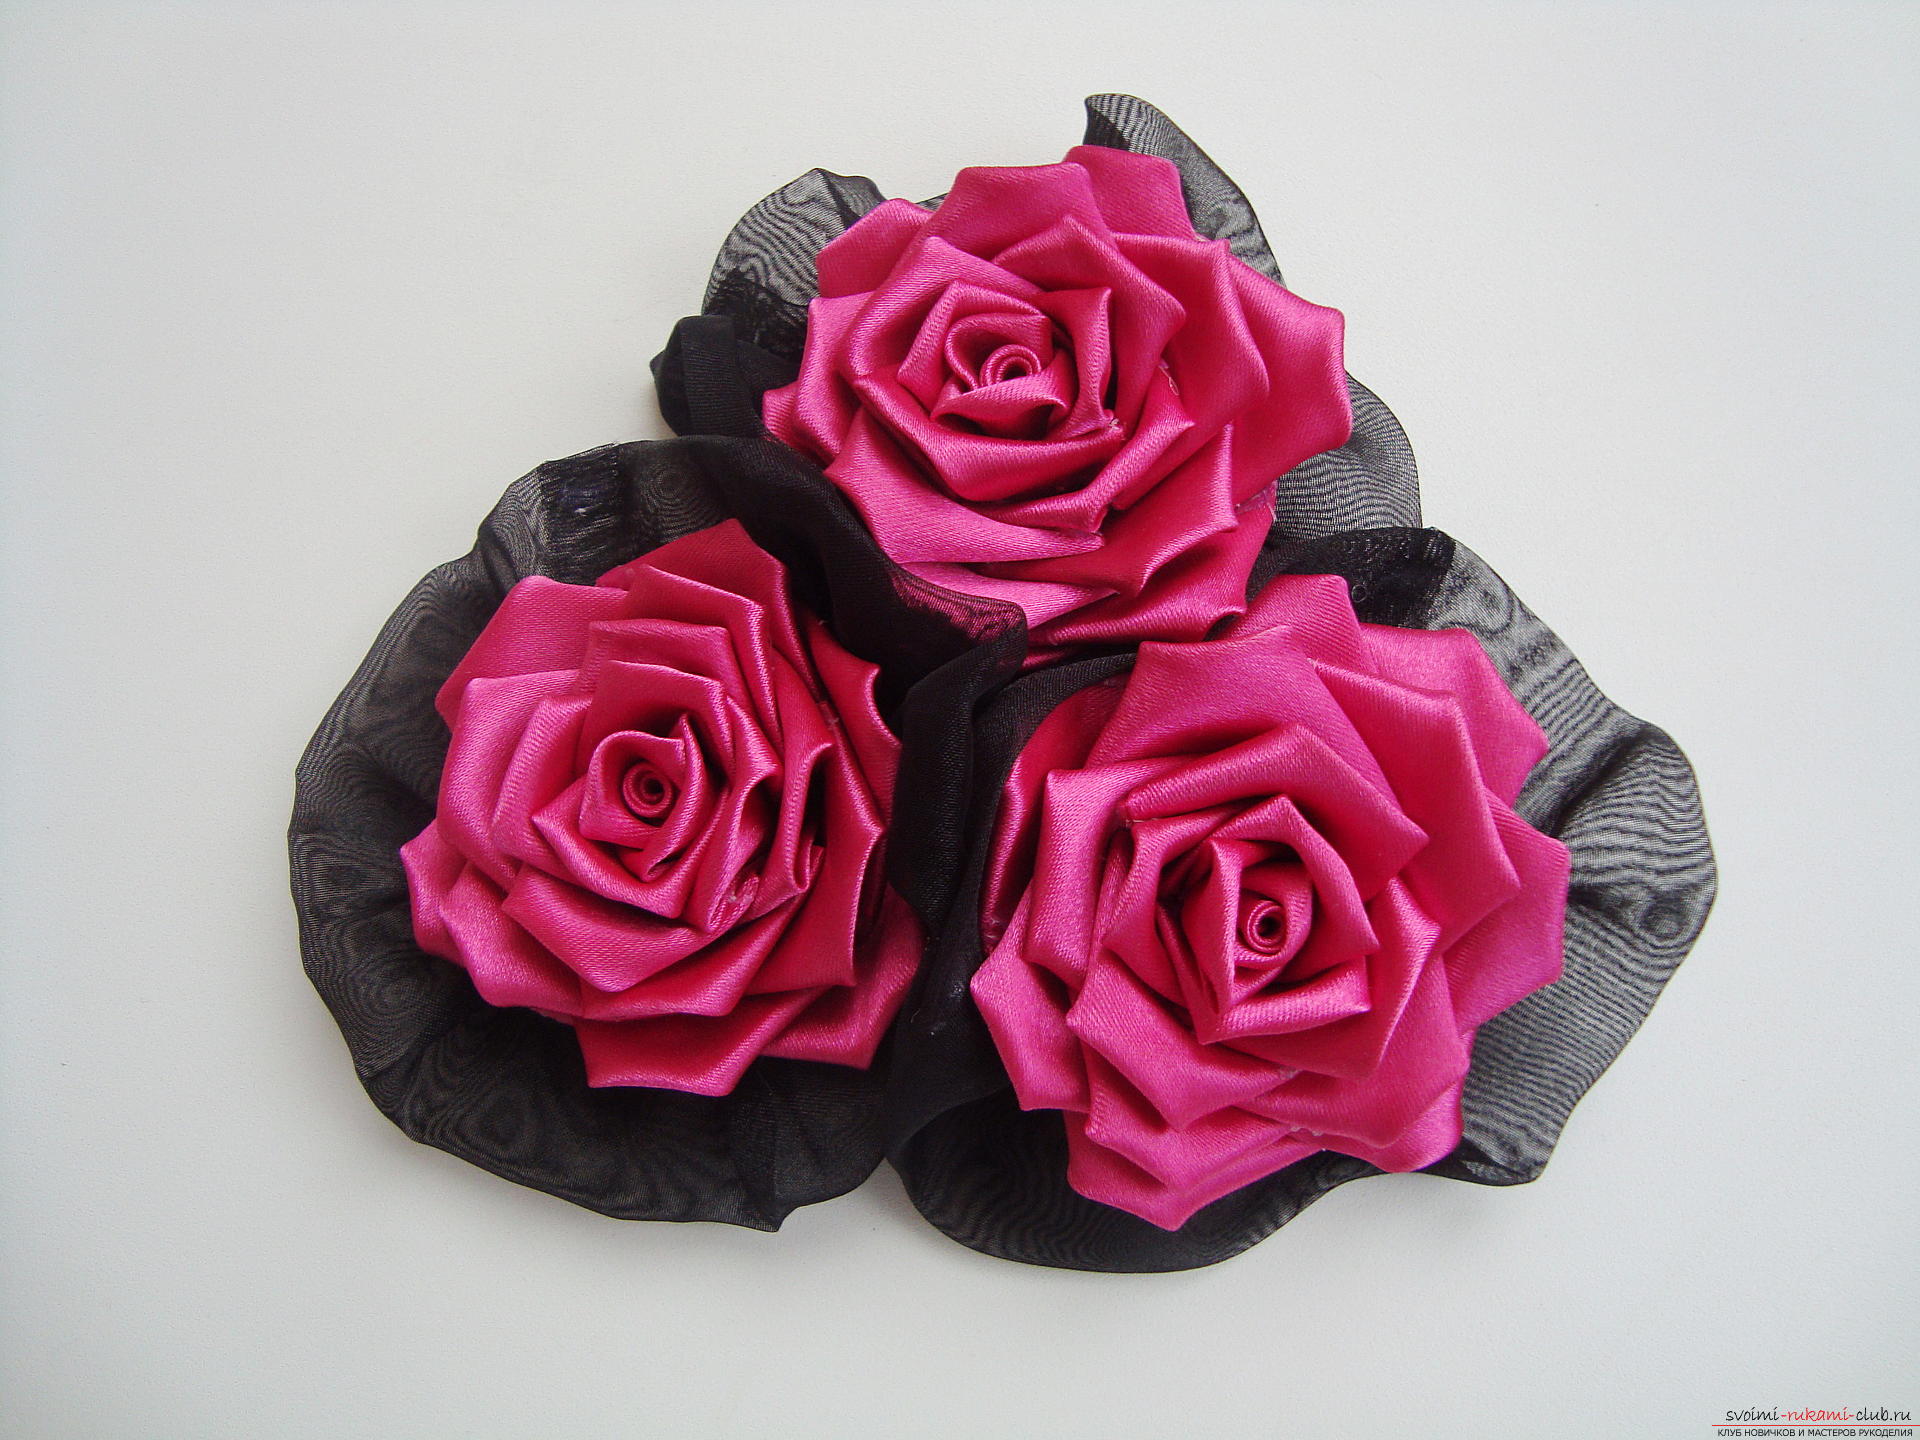 Step-by-step instructions for creating roses from the atlas with your own hands. Photo №1